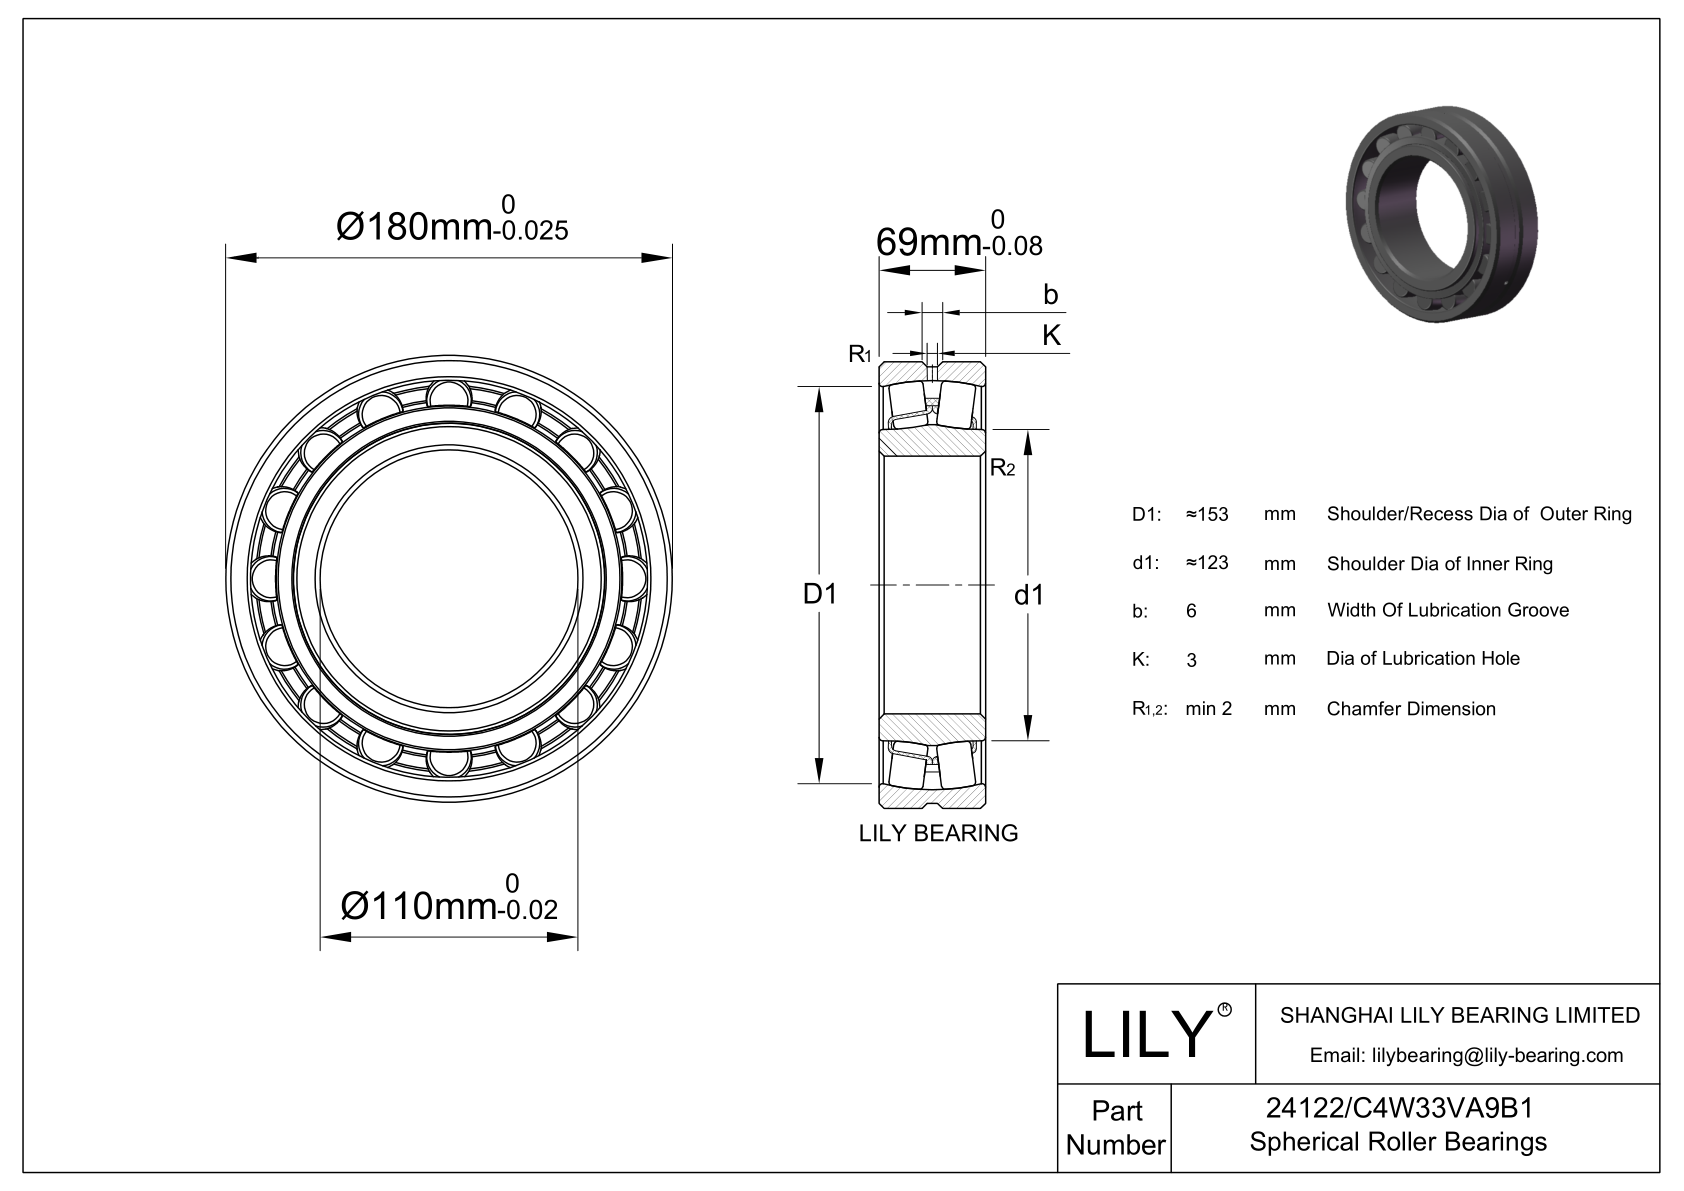 24122/C4W33VA9B1 Double Row Spherical Roller Bearing cad drawing